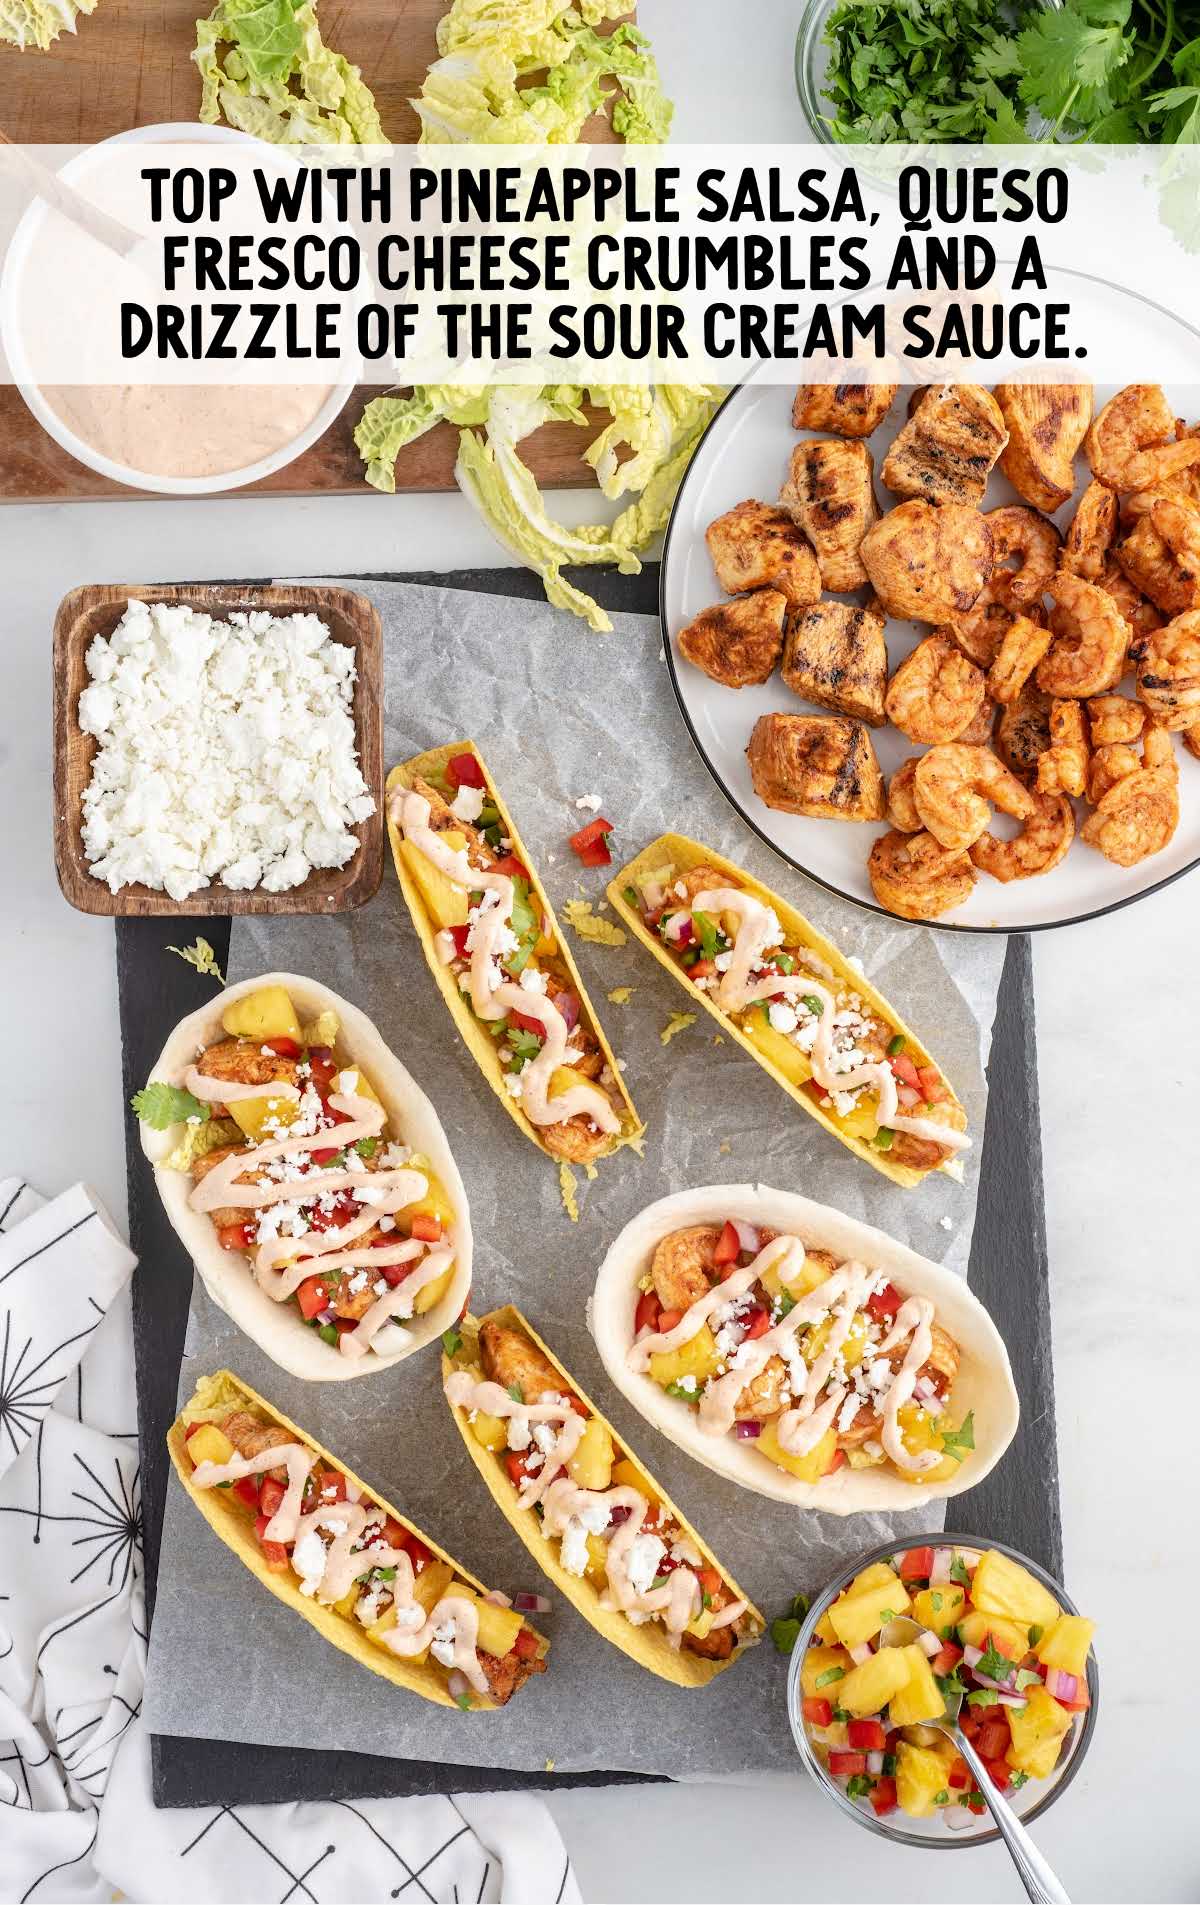 Chicken and Shrimp Tacos and ingredients